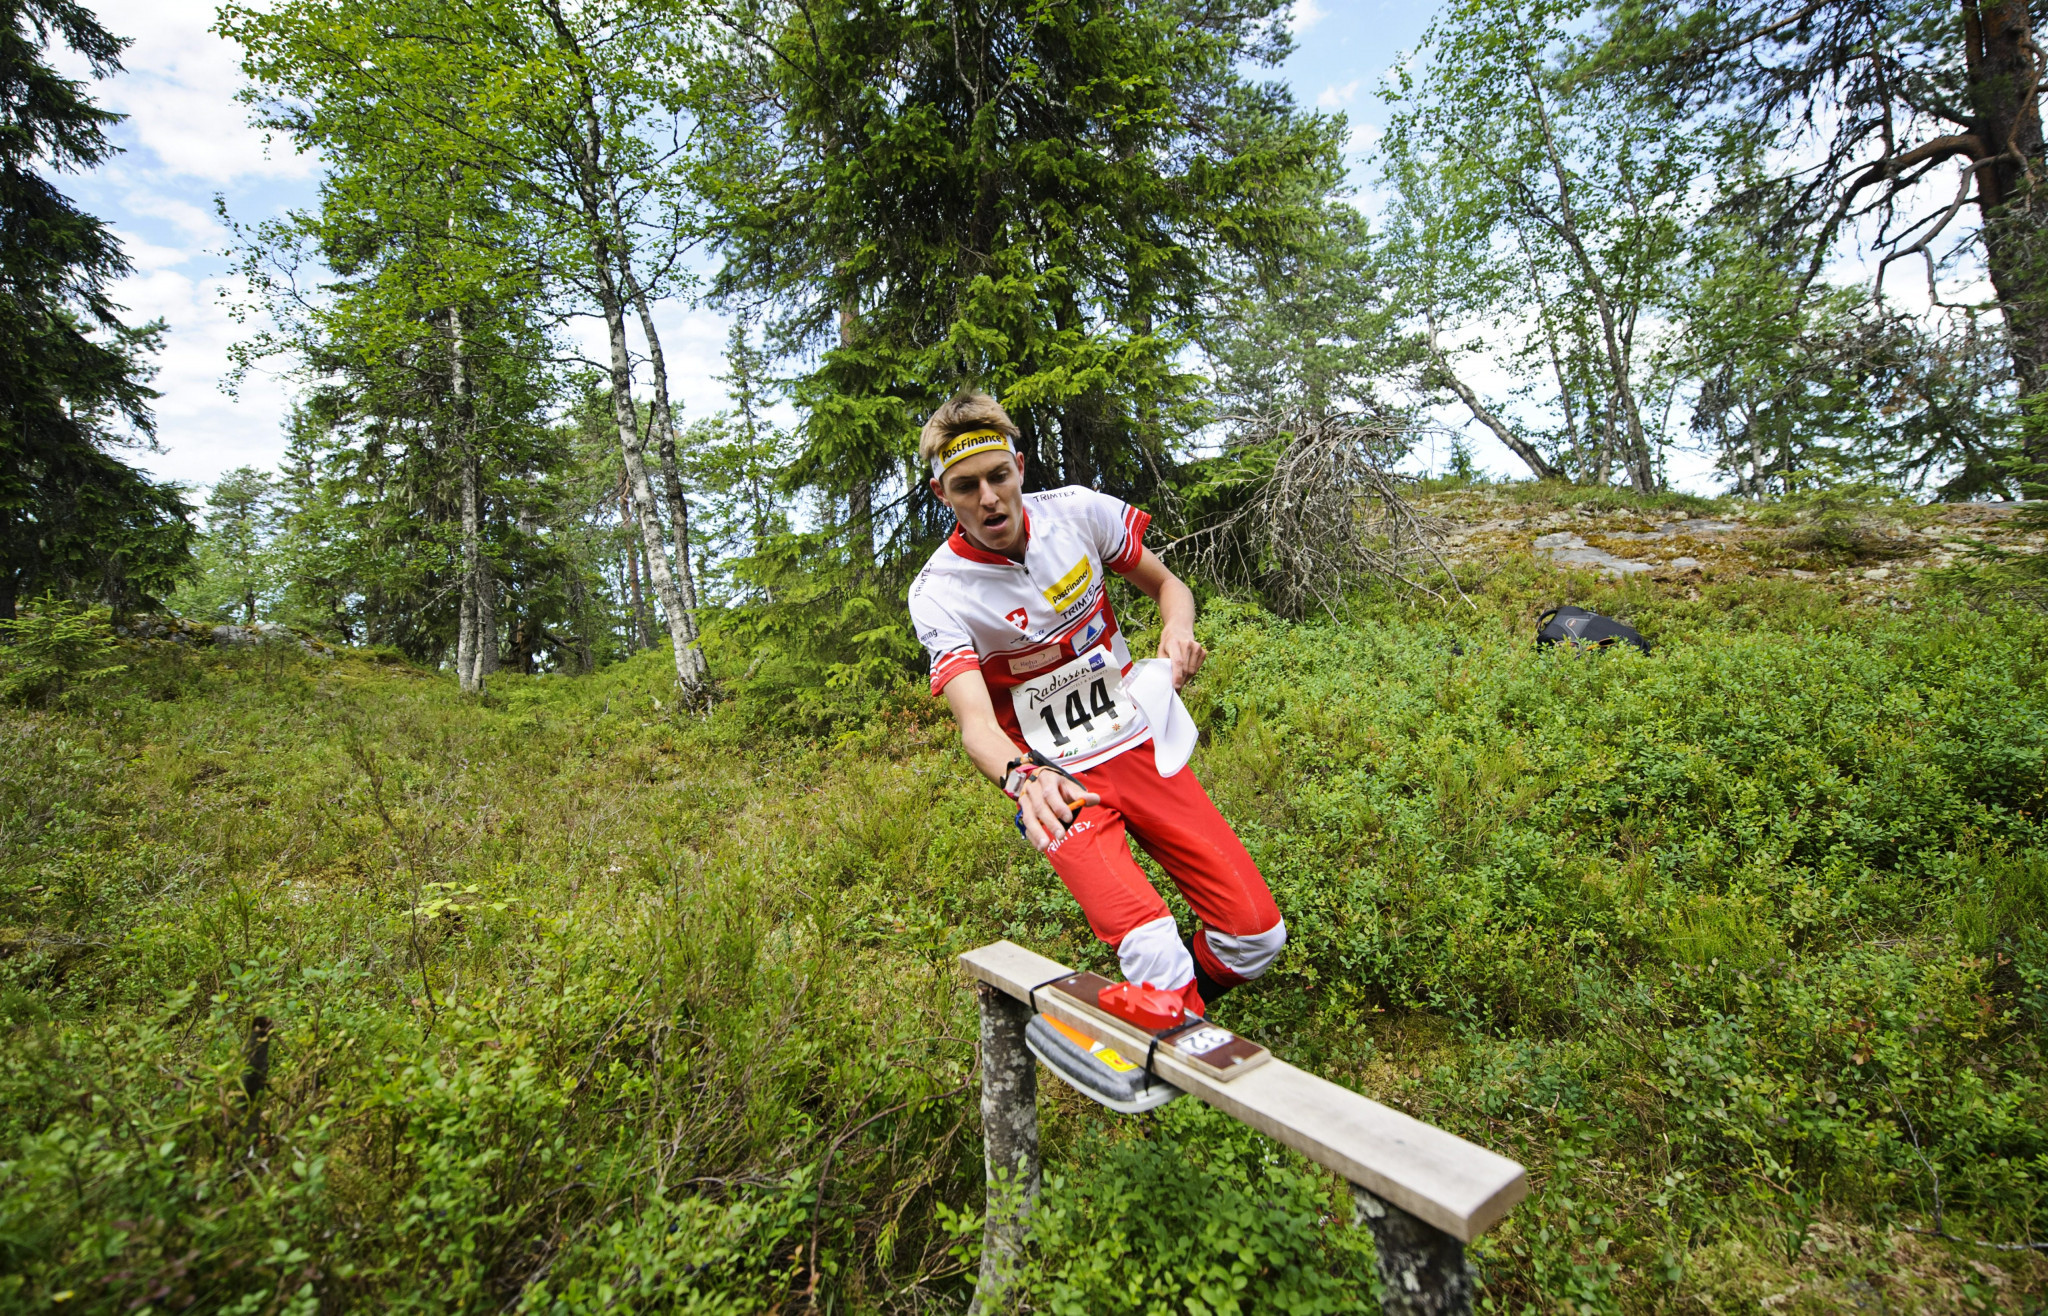 Hubman and Kyburz share gold at European Orienteering Championships